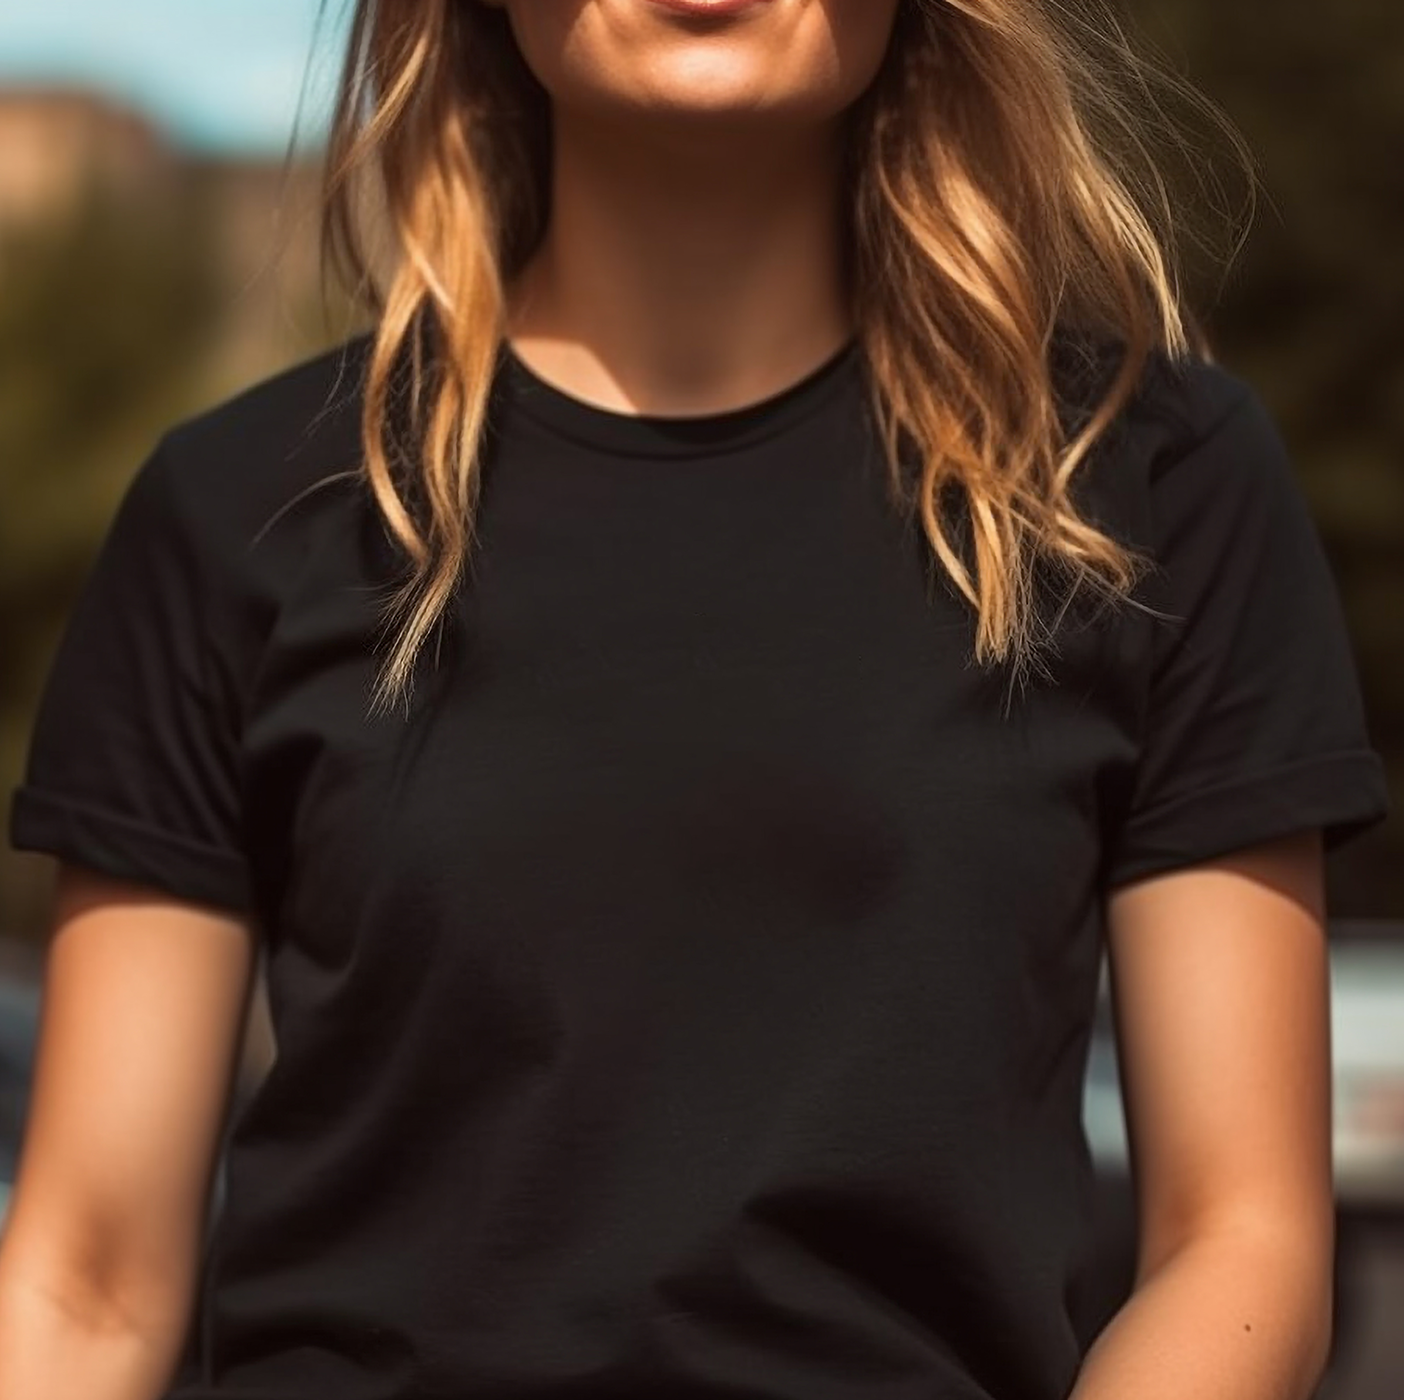 Stock Image of Bella Canvas 3001 Shirt in Black on Person